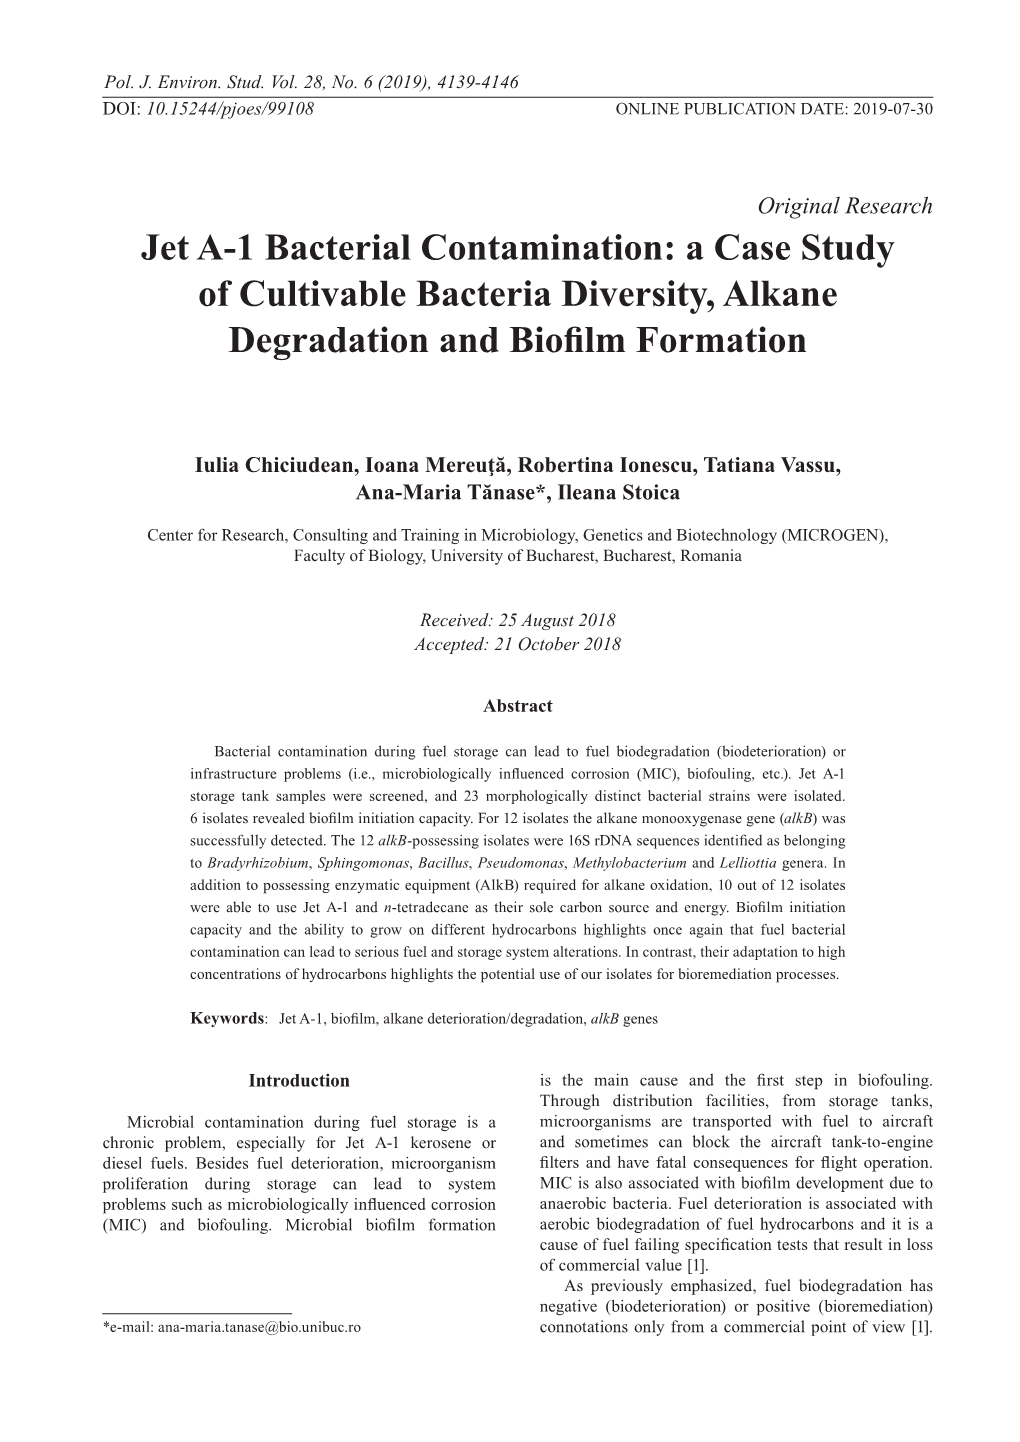 Jet A-1 Bacterial Contamination: a Case Study of Cultivable Bacteria Diversity, Alkane Degradation and Biofilm Formation